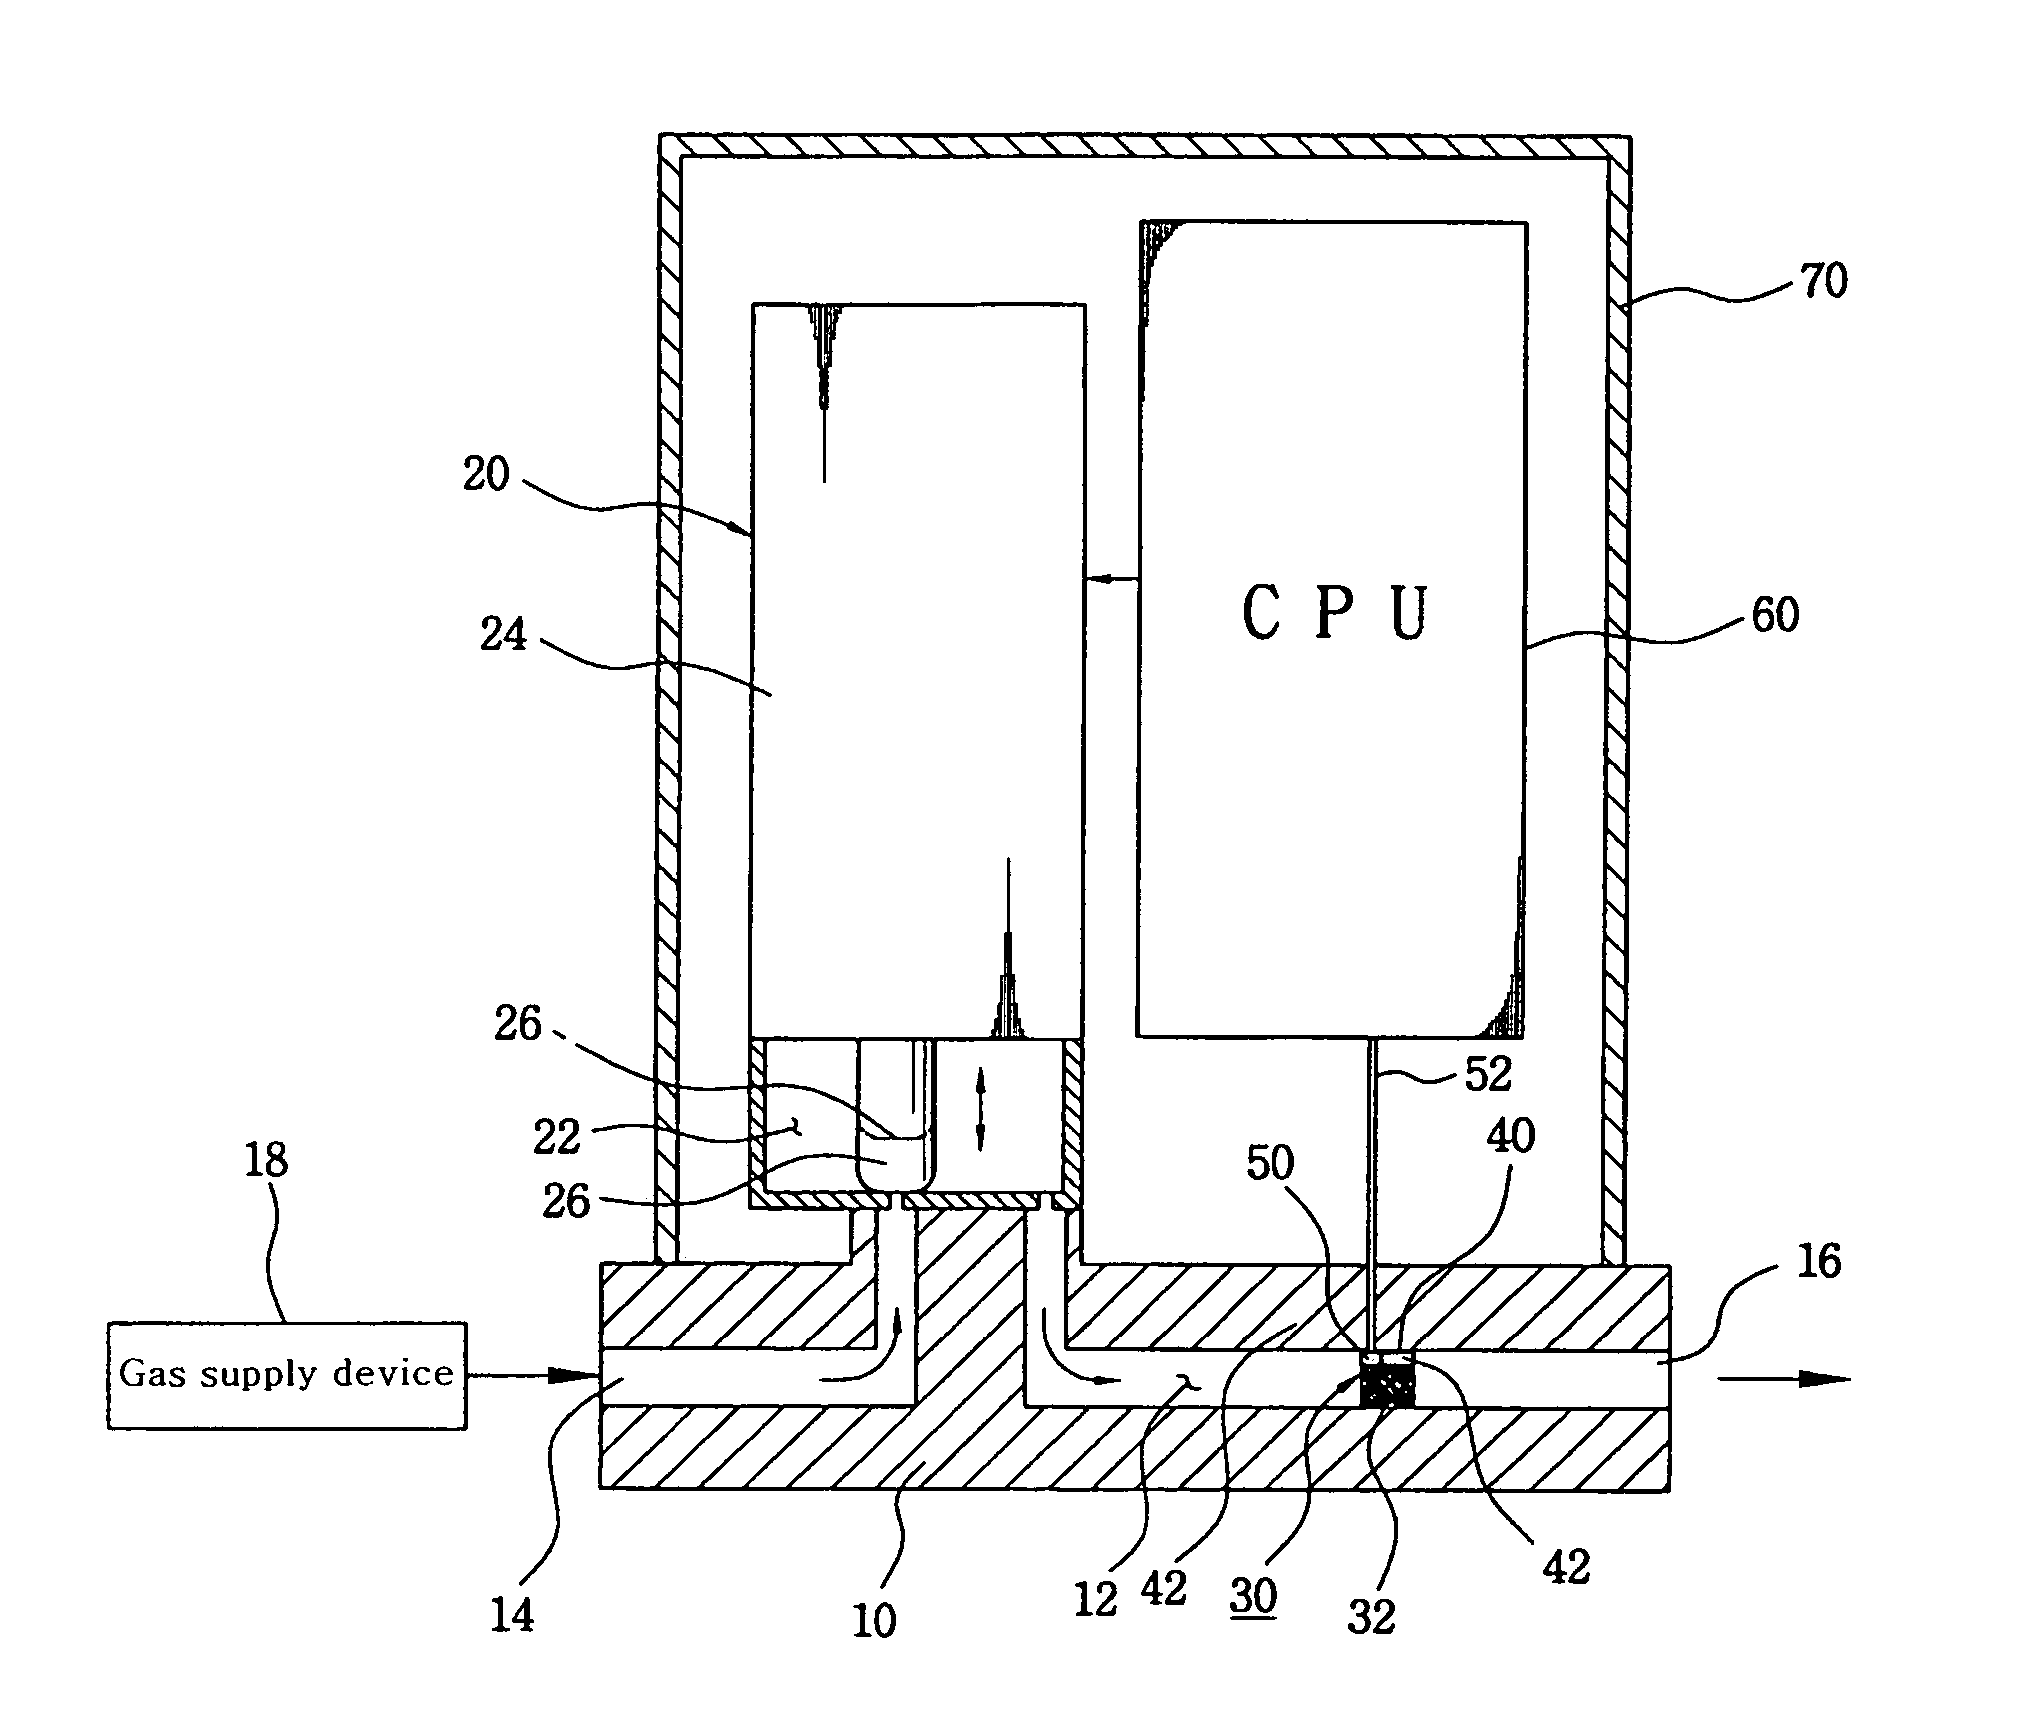 Apparatus for controlling flow rate of gases used in semiconductor device by differential pressure